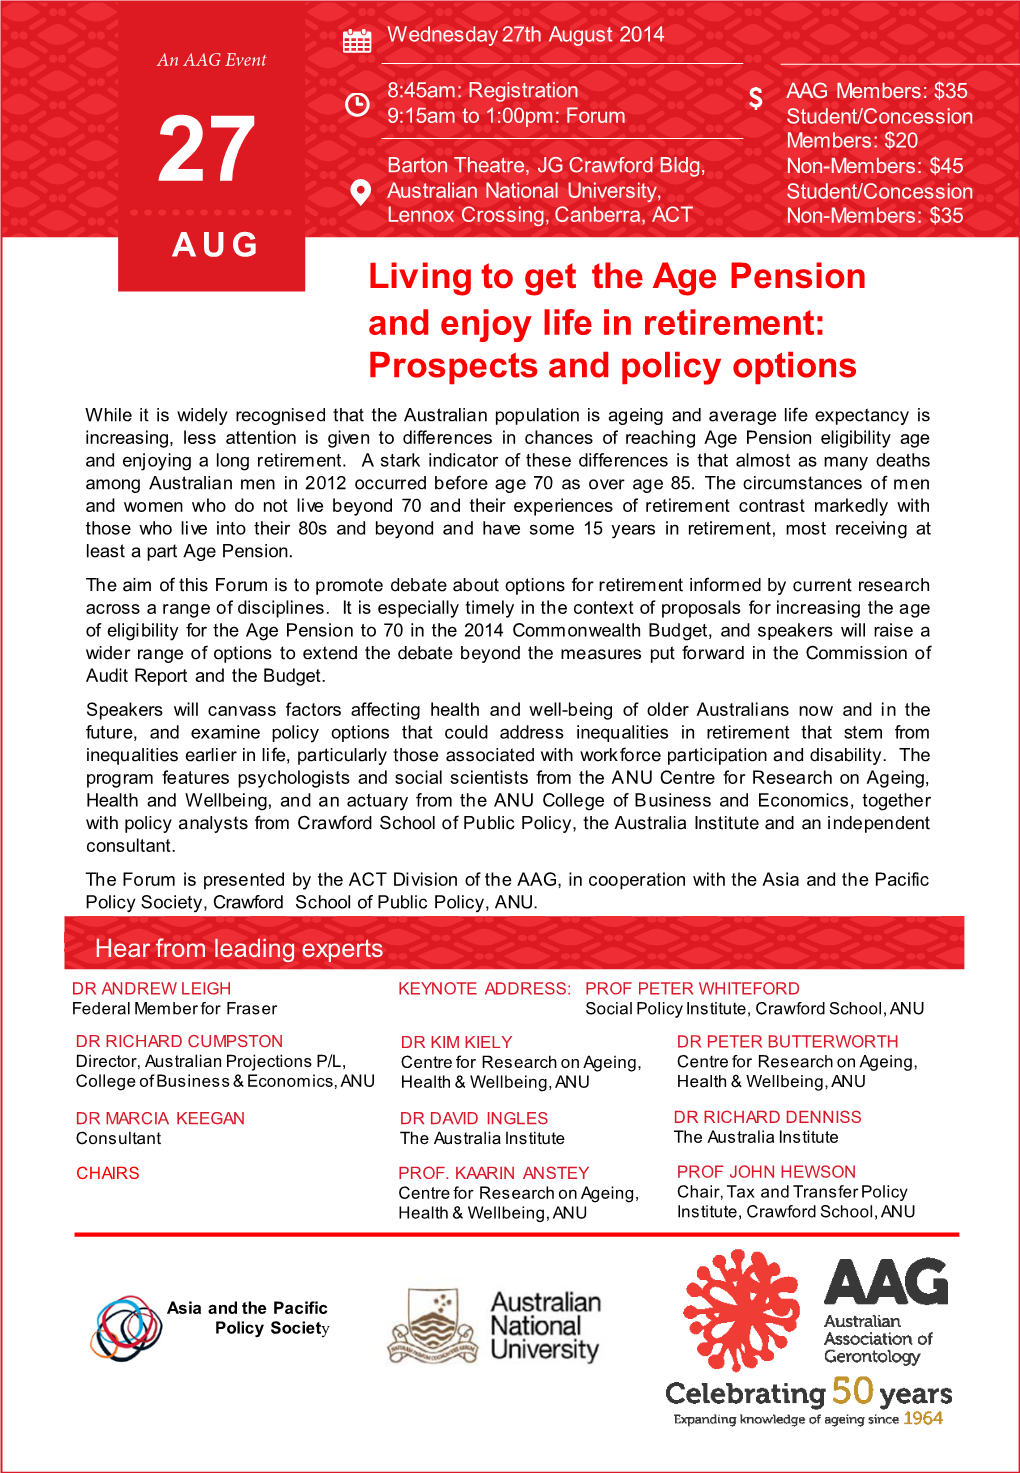 Living to Get the Age Pension and Enjoy Life in Retirement